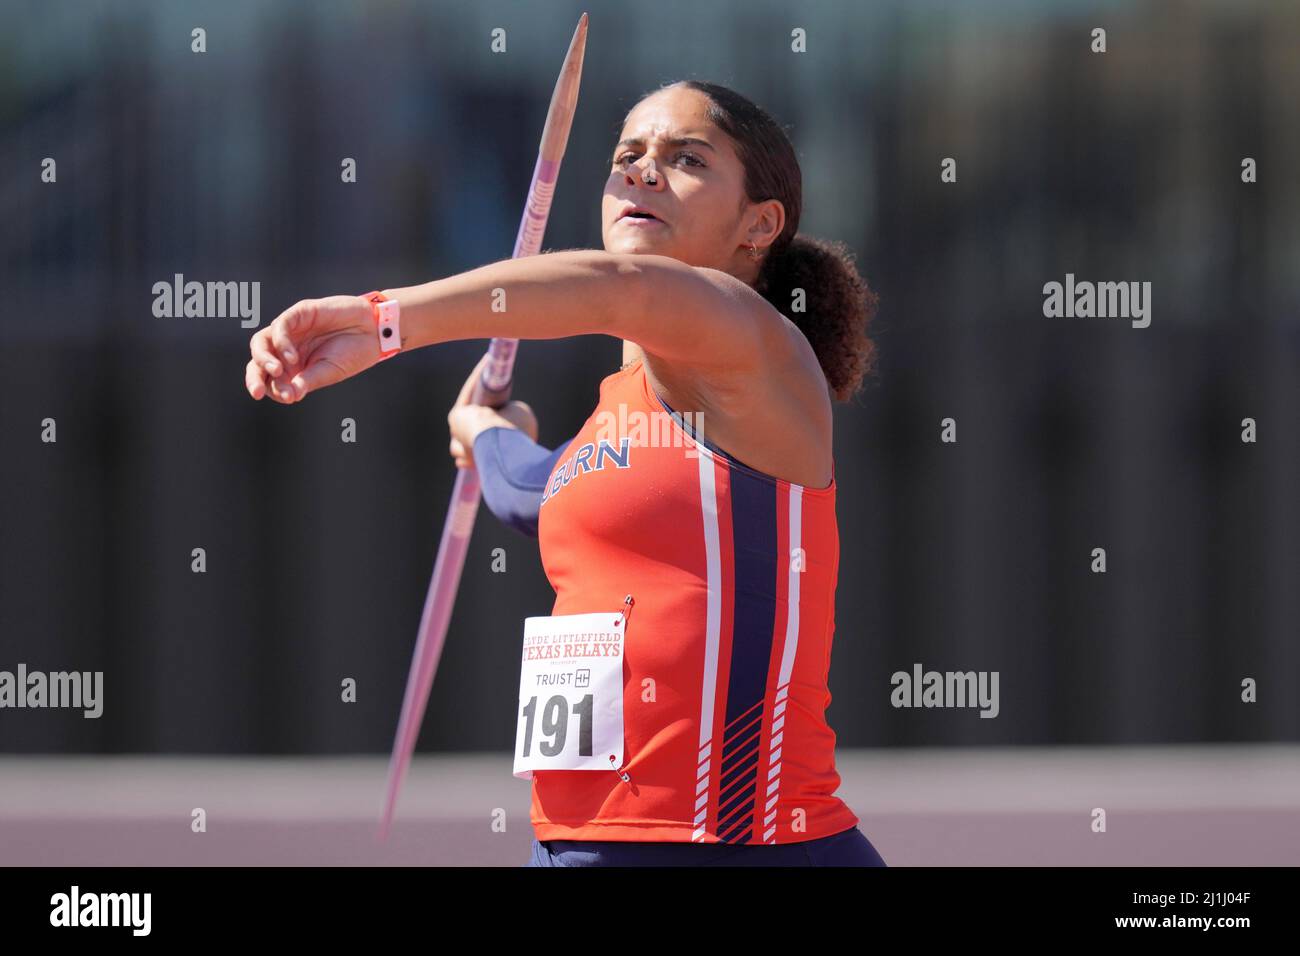 Keira McCarrell of Auburn wins the women's javelin with a throw of 185-7 (56.56m) during the 94th Clyde Littlefield Texas Relays, Friday, Mar 25, 2022 Stock Photo